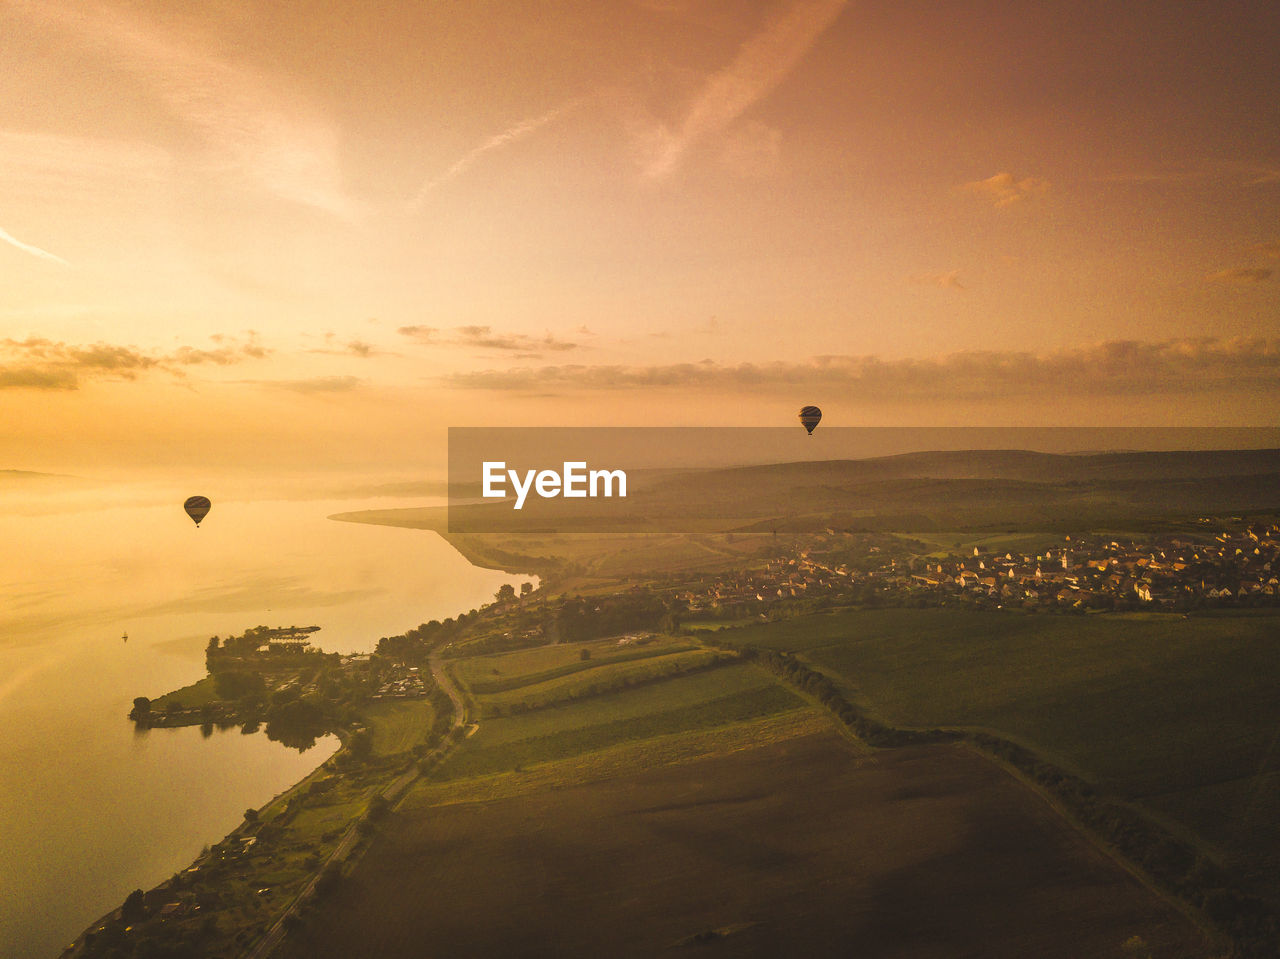 Hot air balloon flying over landscape against sky during sunset